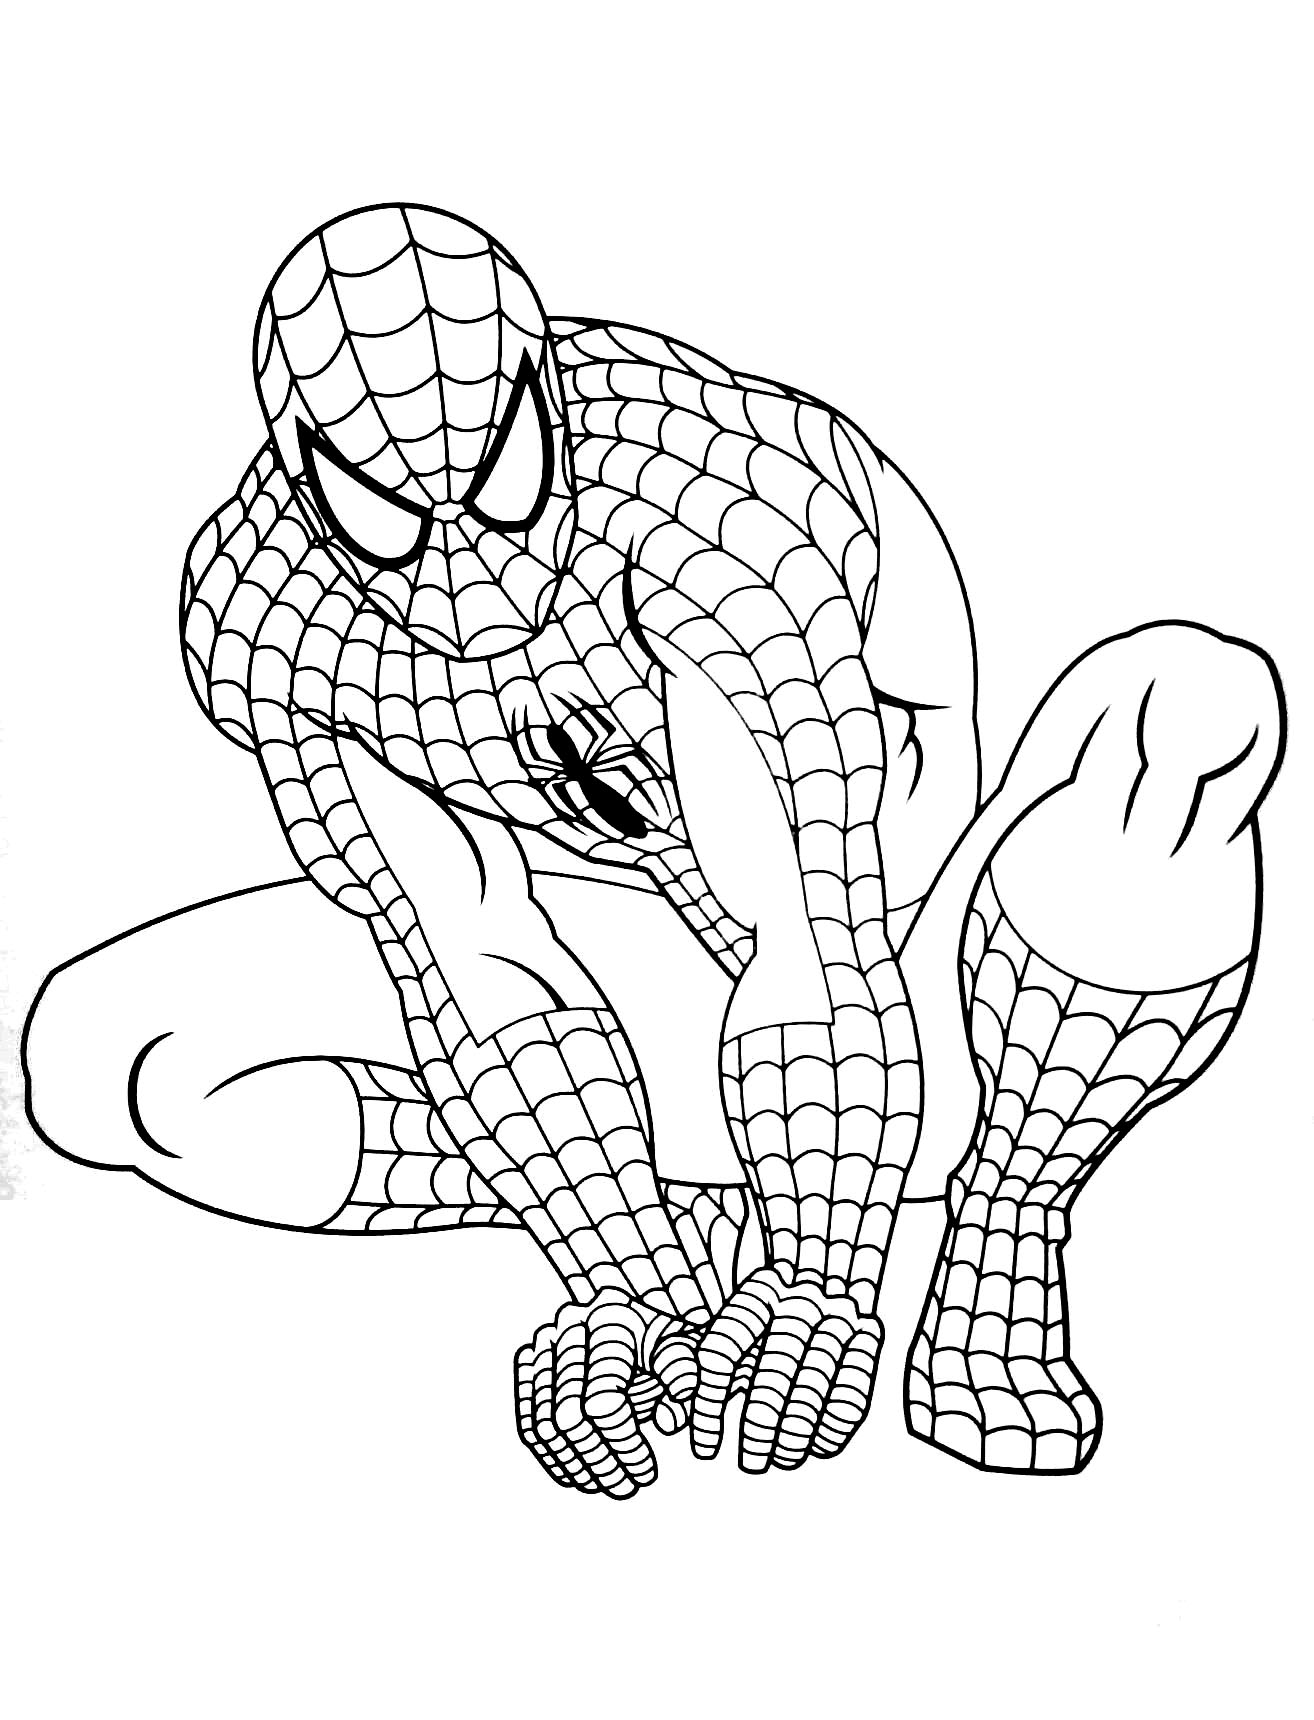 Spiderman coloring pages to print for kids Spiderman Kids Coloring Pages